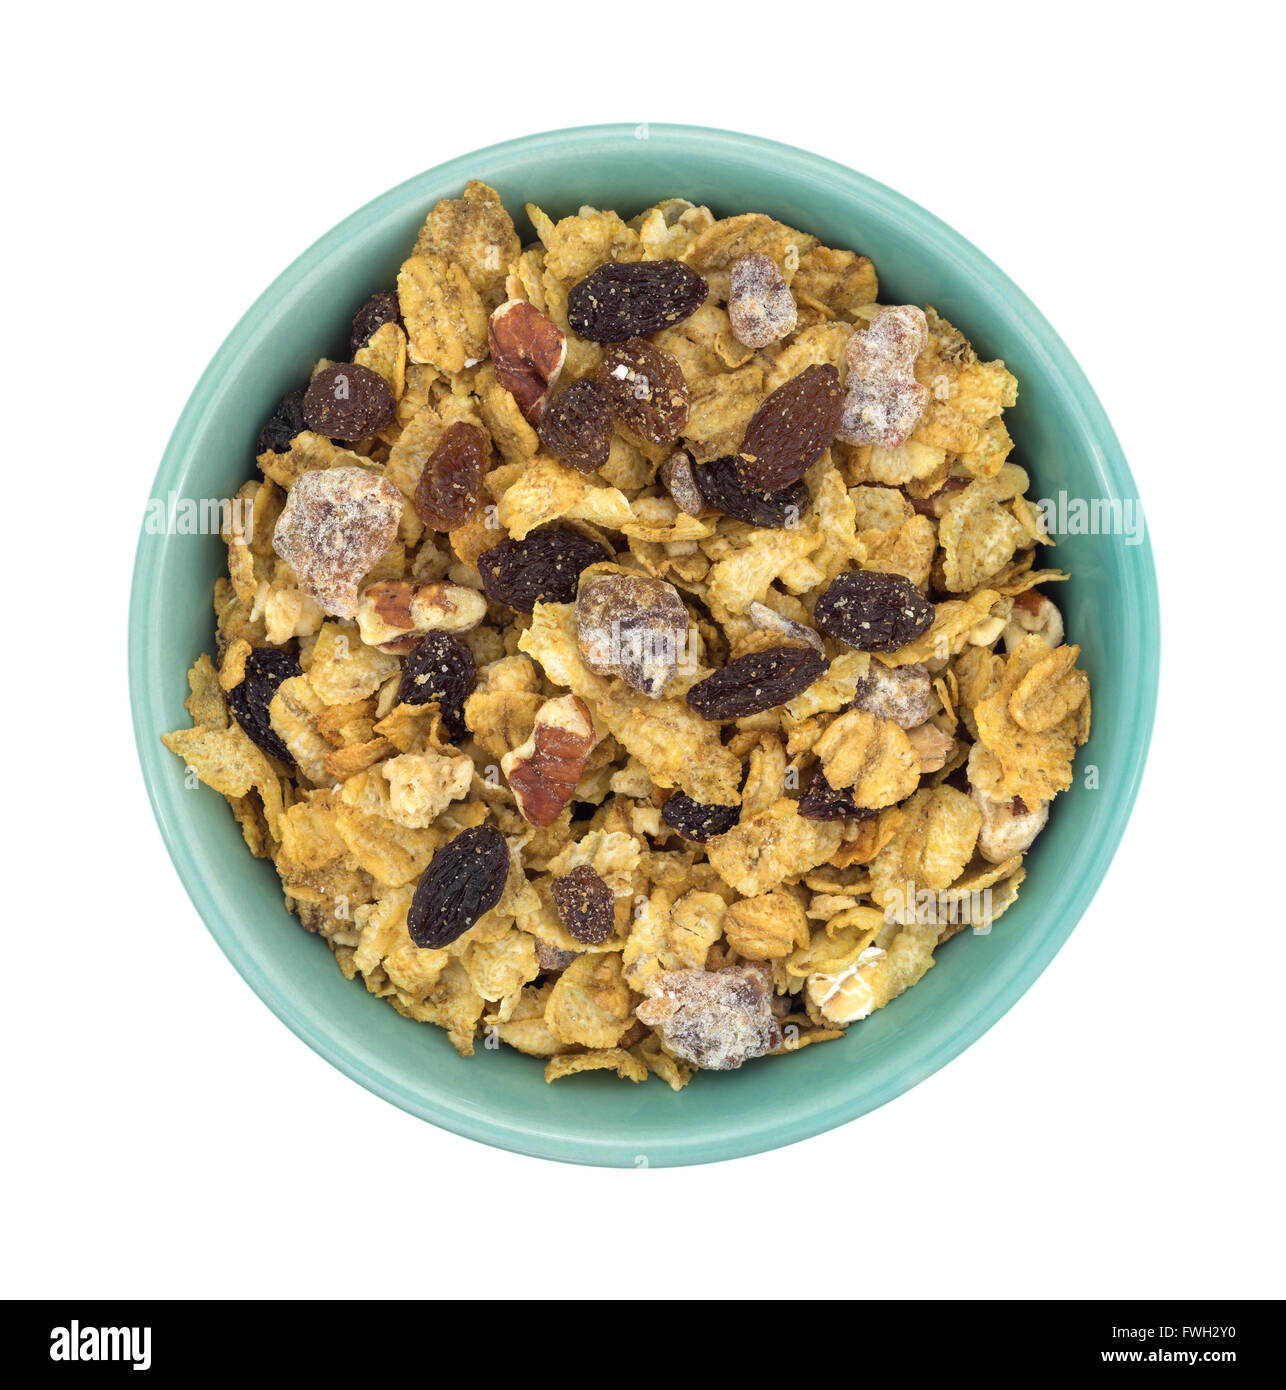 Top view of a bowl filled with pecans, raisins and dates breakfast cereal isolated on a white background. Stock Photo